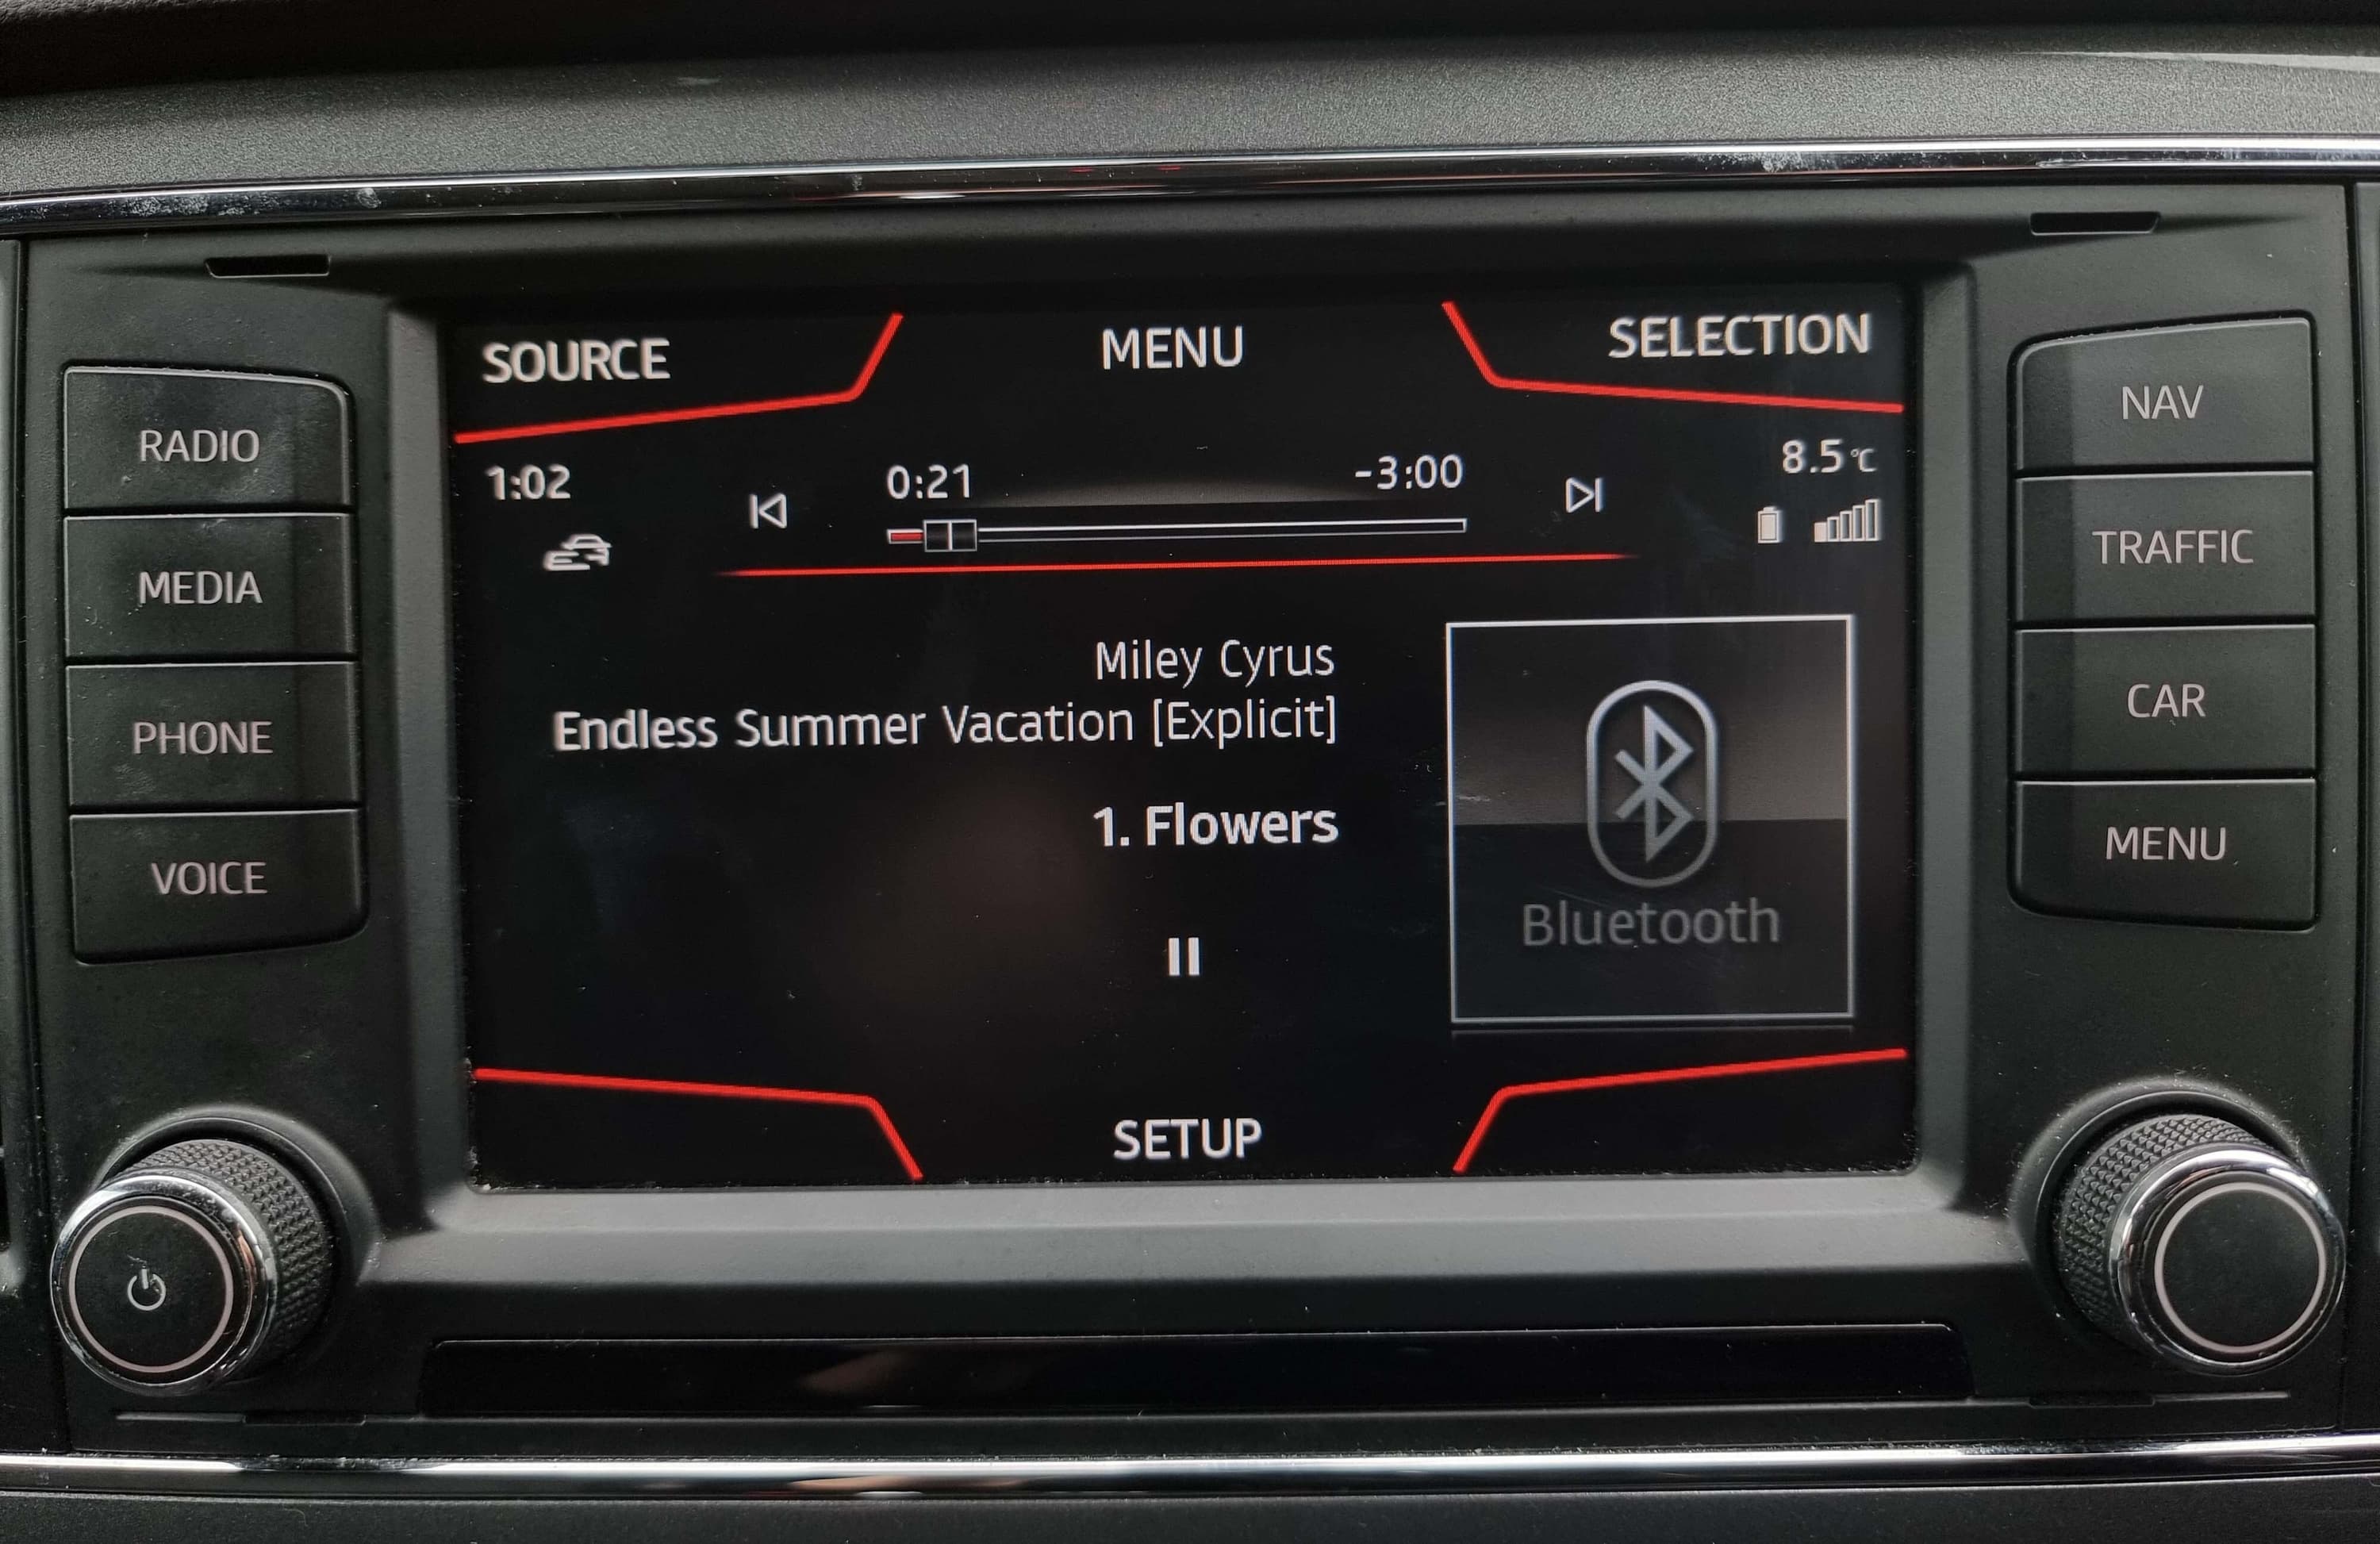 Image shows a black car stereo, which is playing Miley Cyrus - Flowers via Bluetooth connection/.